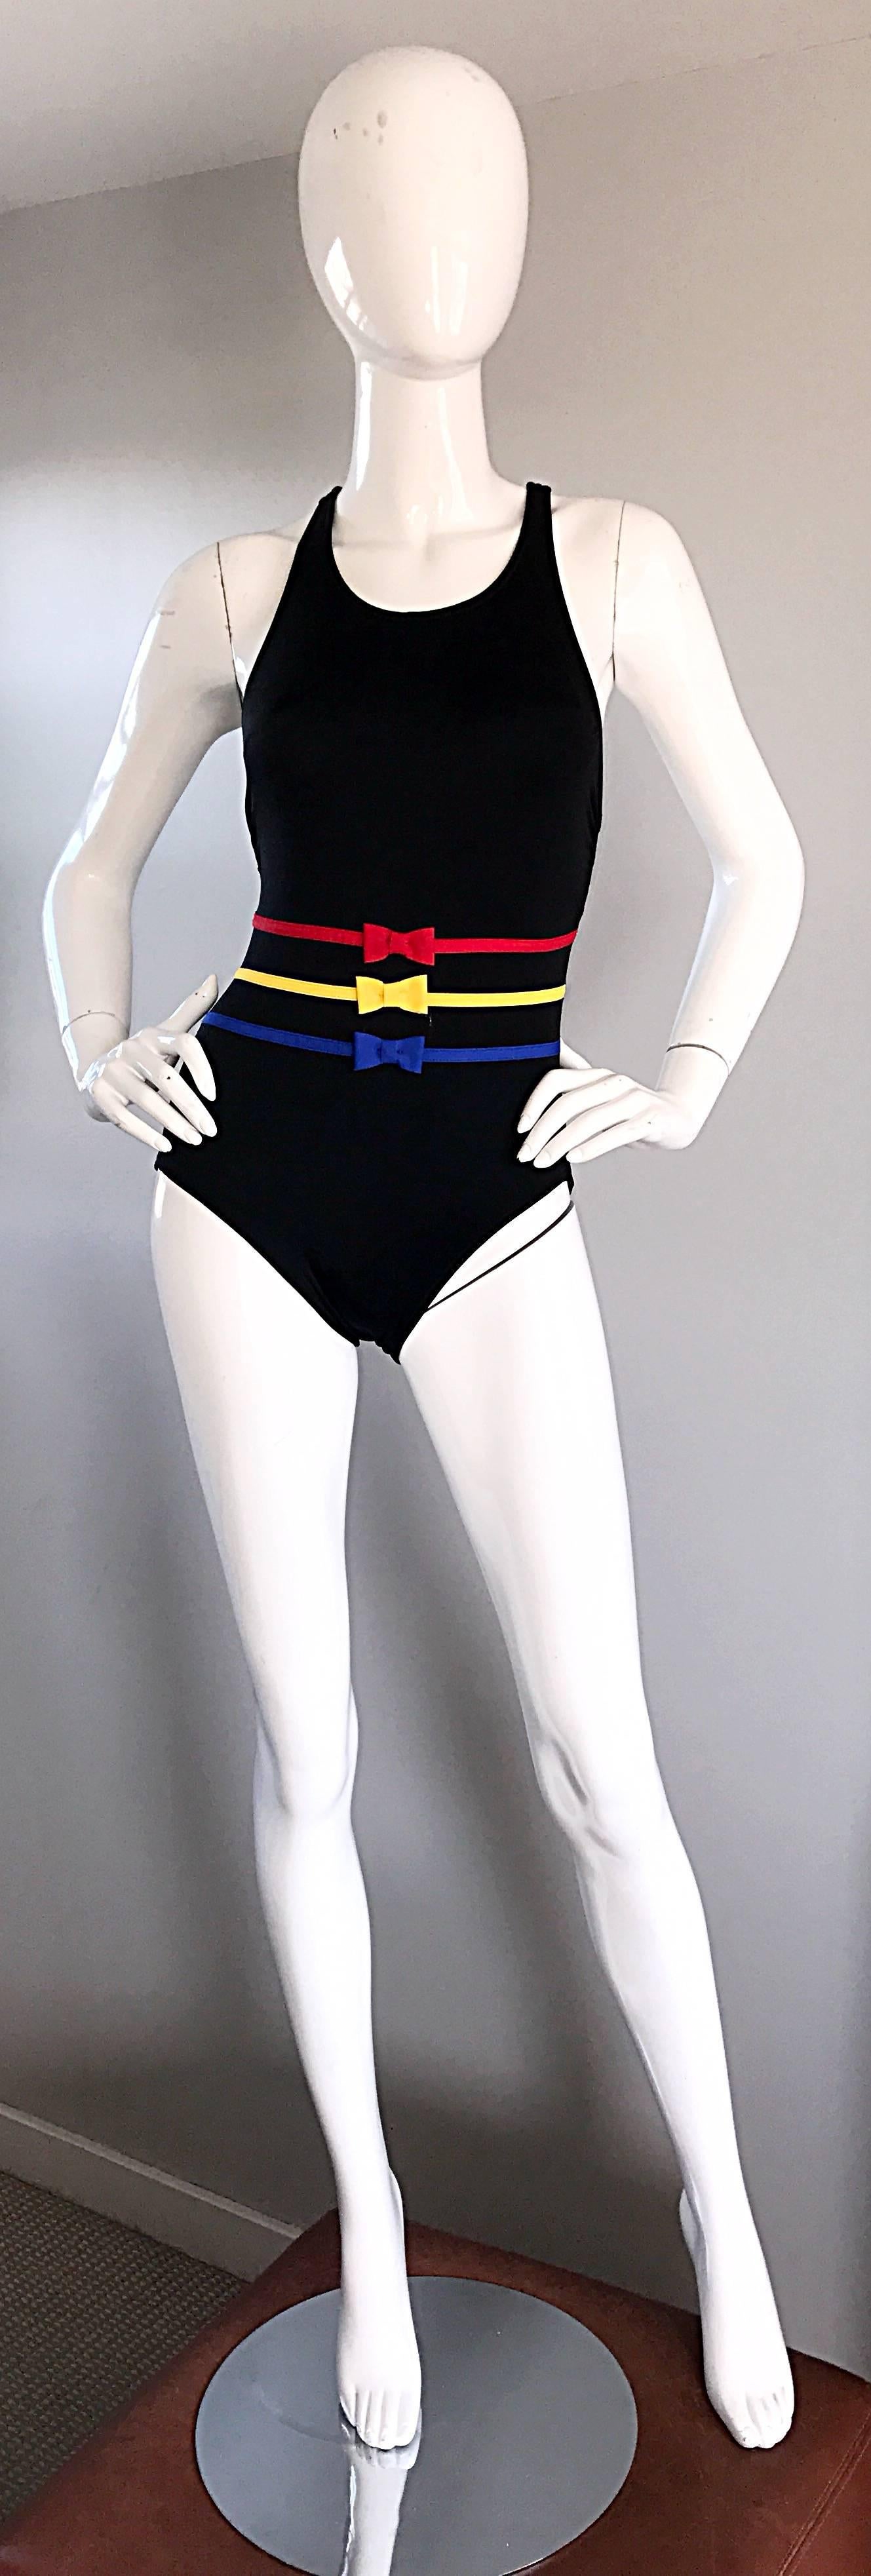 Bill Blass New Vintage 1990s 90s Chic One Piece Swimsuit / Bodysuit with Bows 4